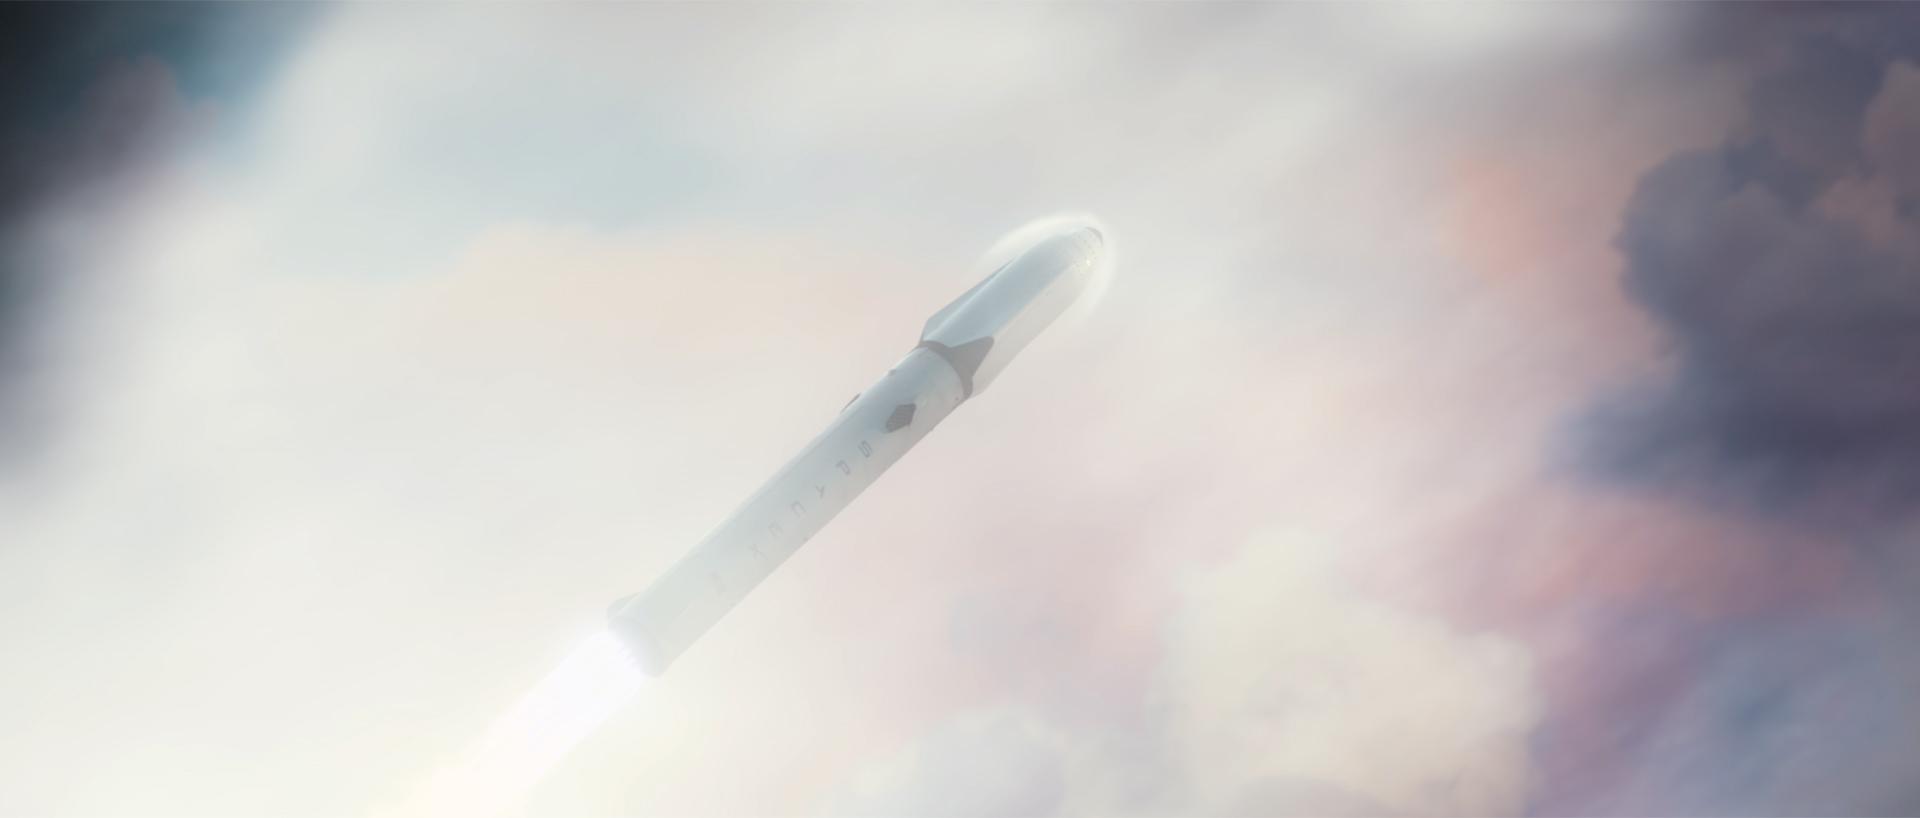 SpaceX Mars mission event: all the important details - SlashGear1920 x 818